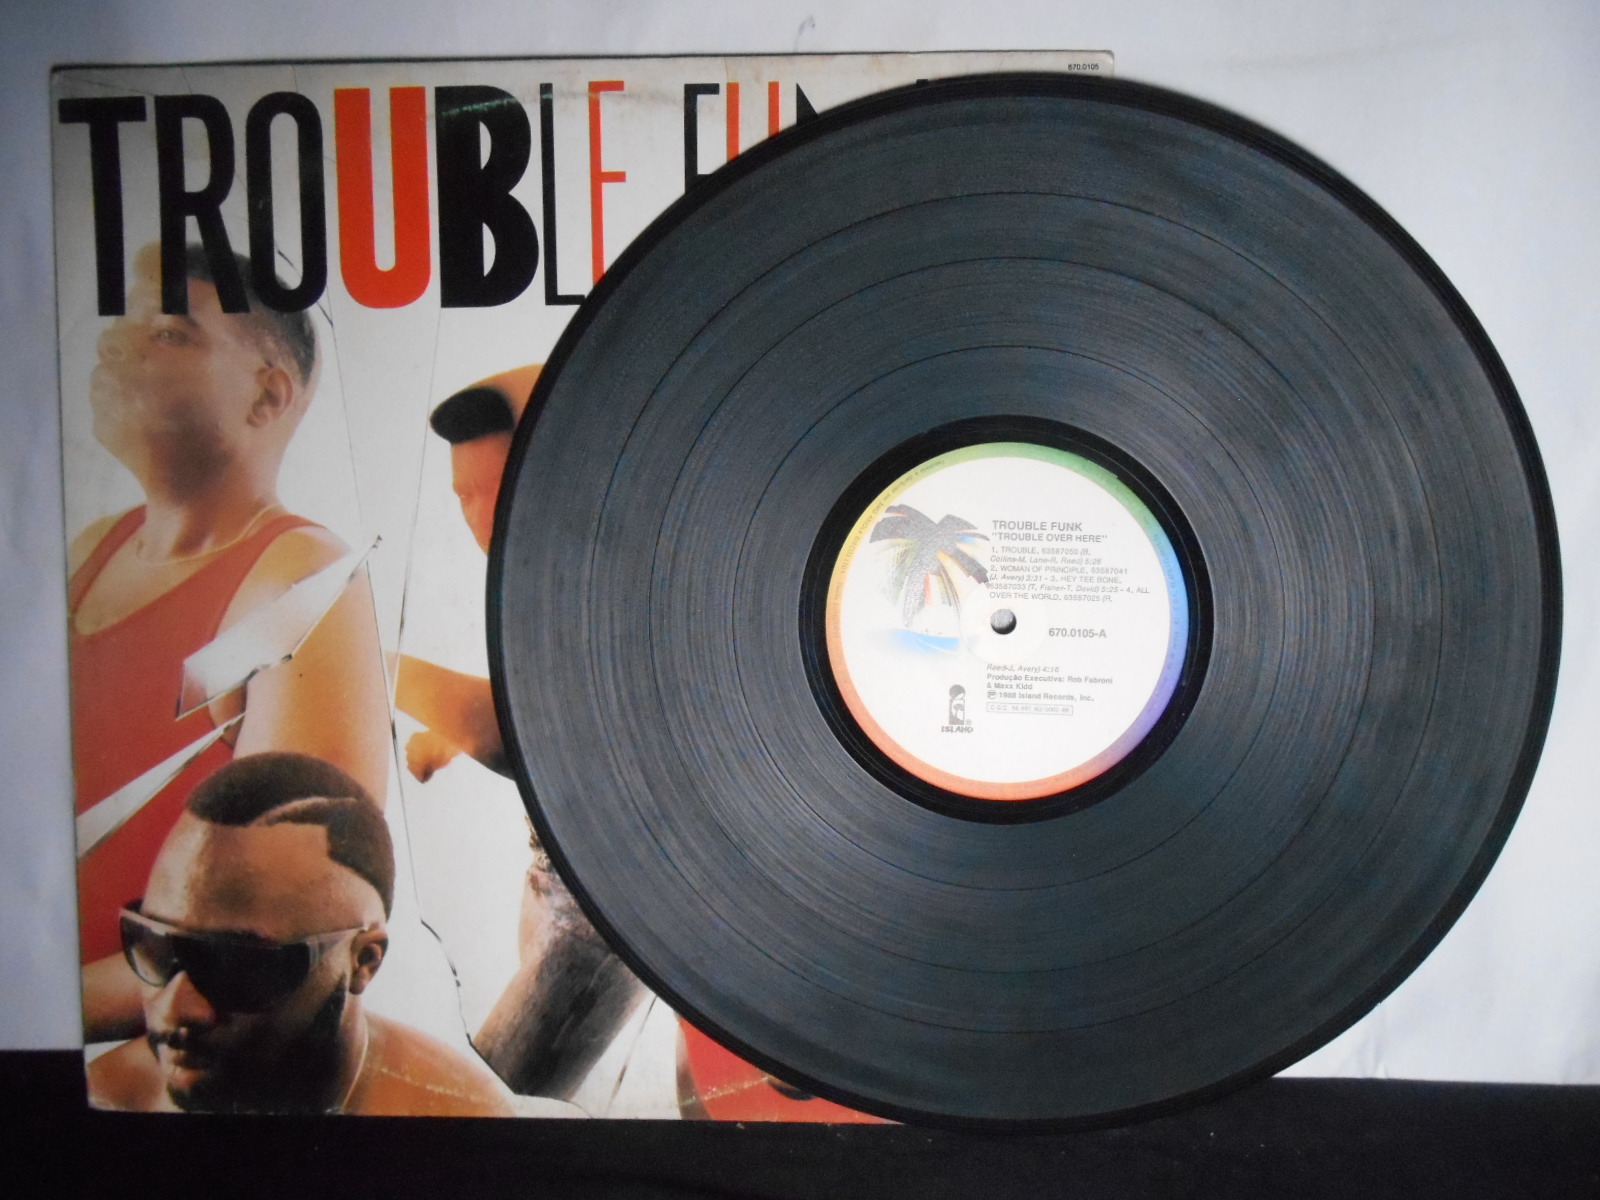 Vinil - Trouble Funk - Trouble Over Here